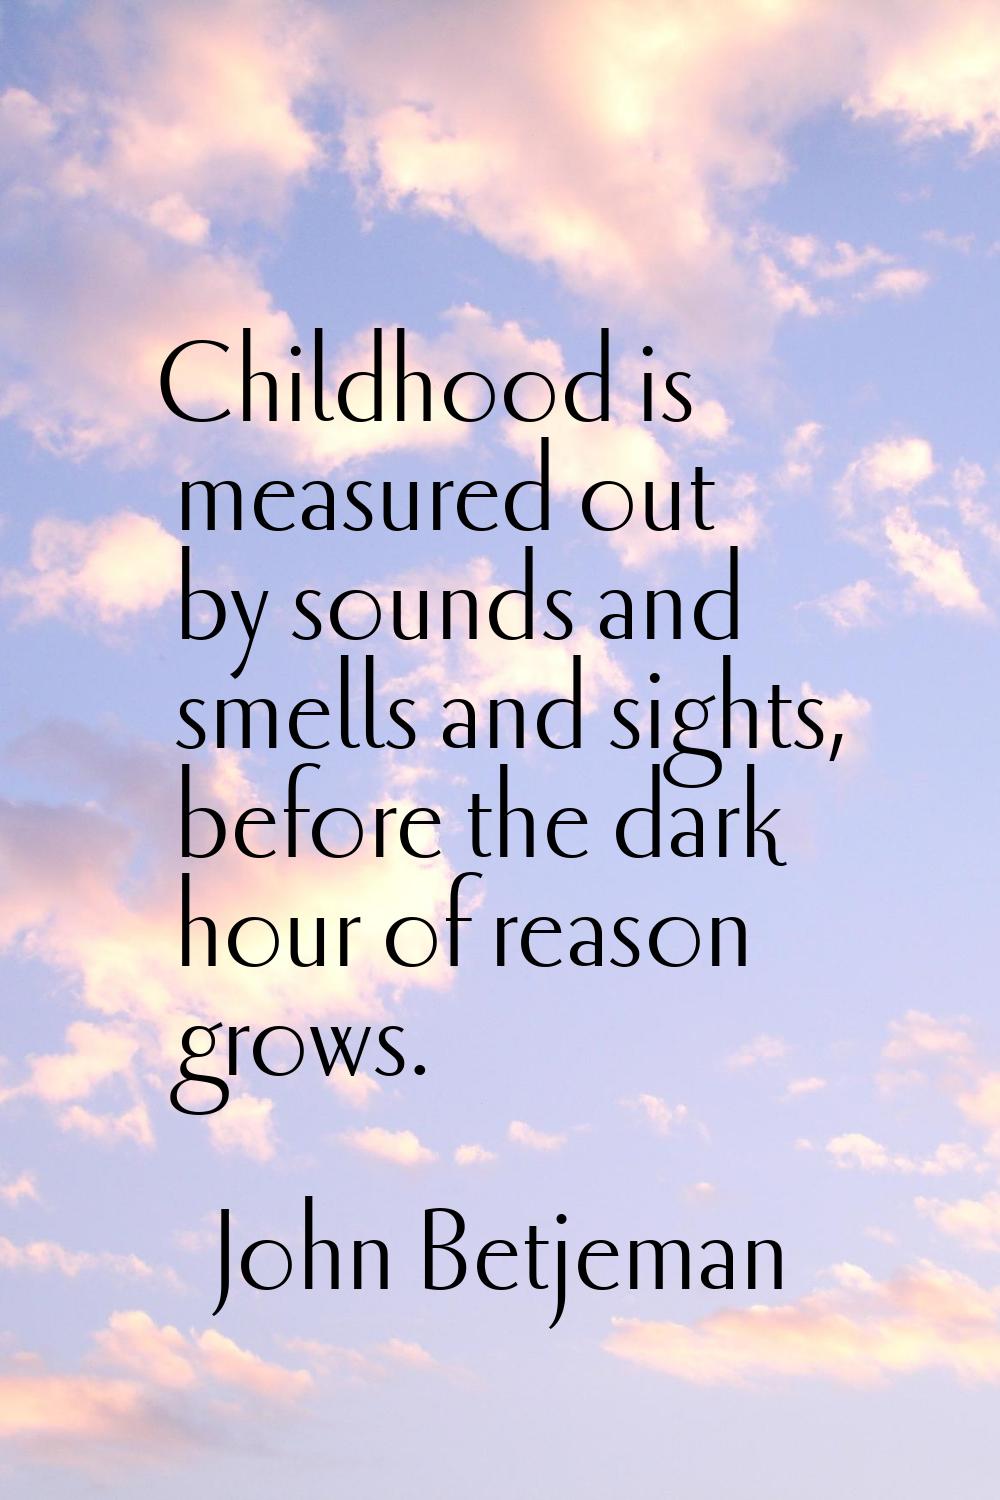 Childhood is measured out by sounds and smells and sights, before the dark hour of reason grows.